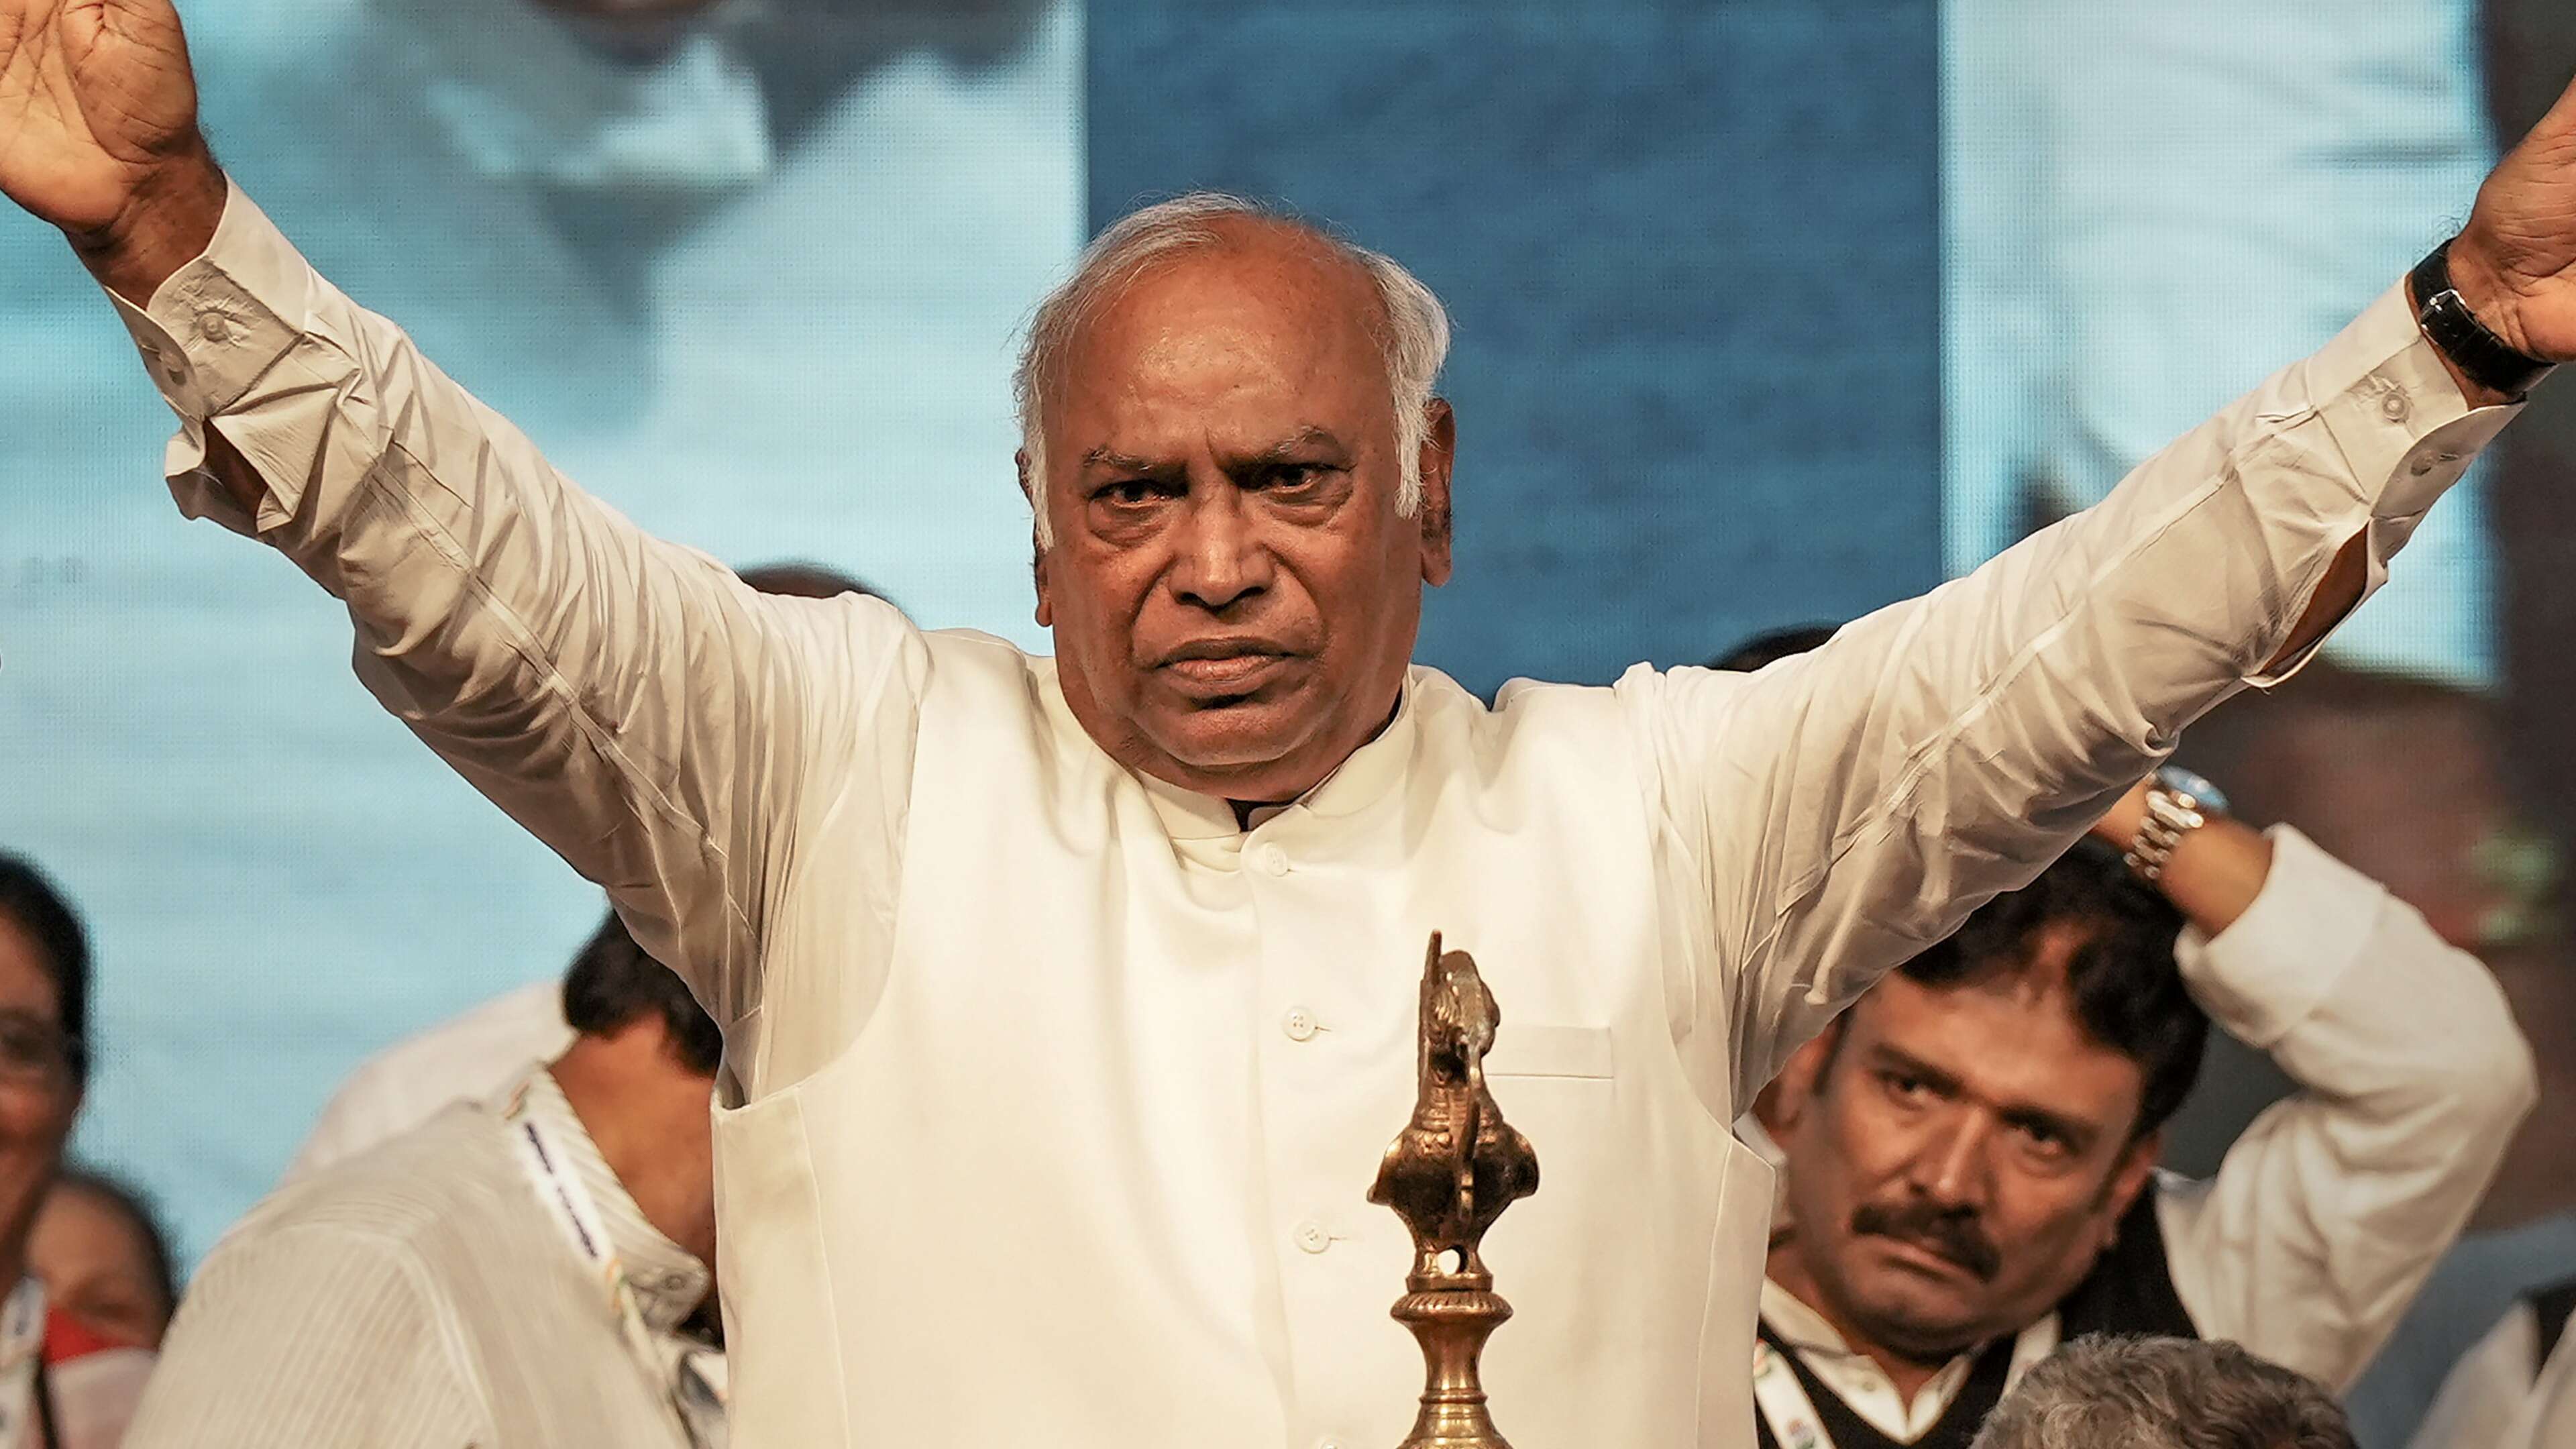 BJP Trying To Misuse My Remarks; Politics Is Not About Individuals But Policies: Kharge Reacts To Ravan Row